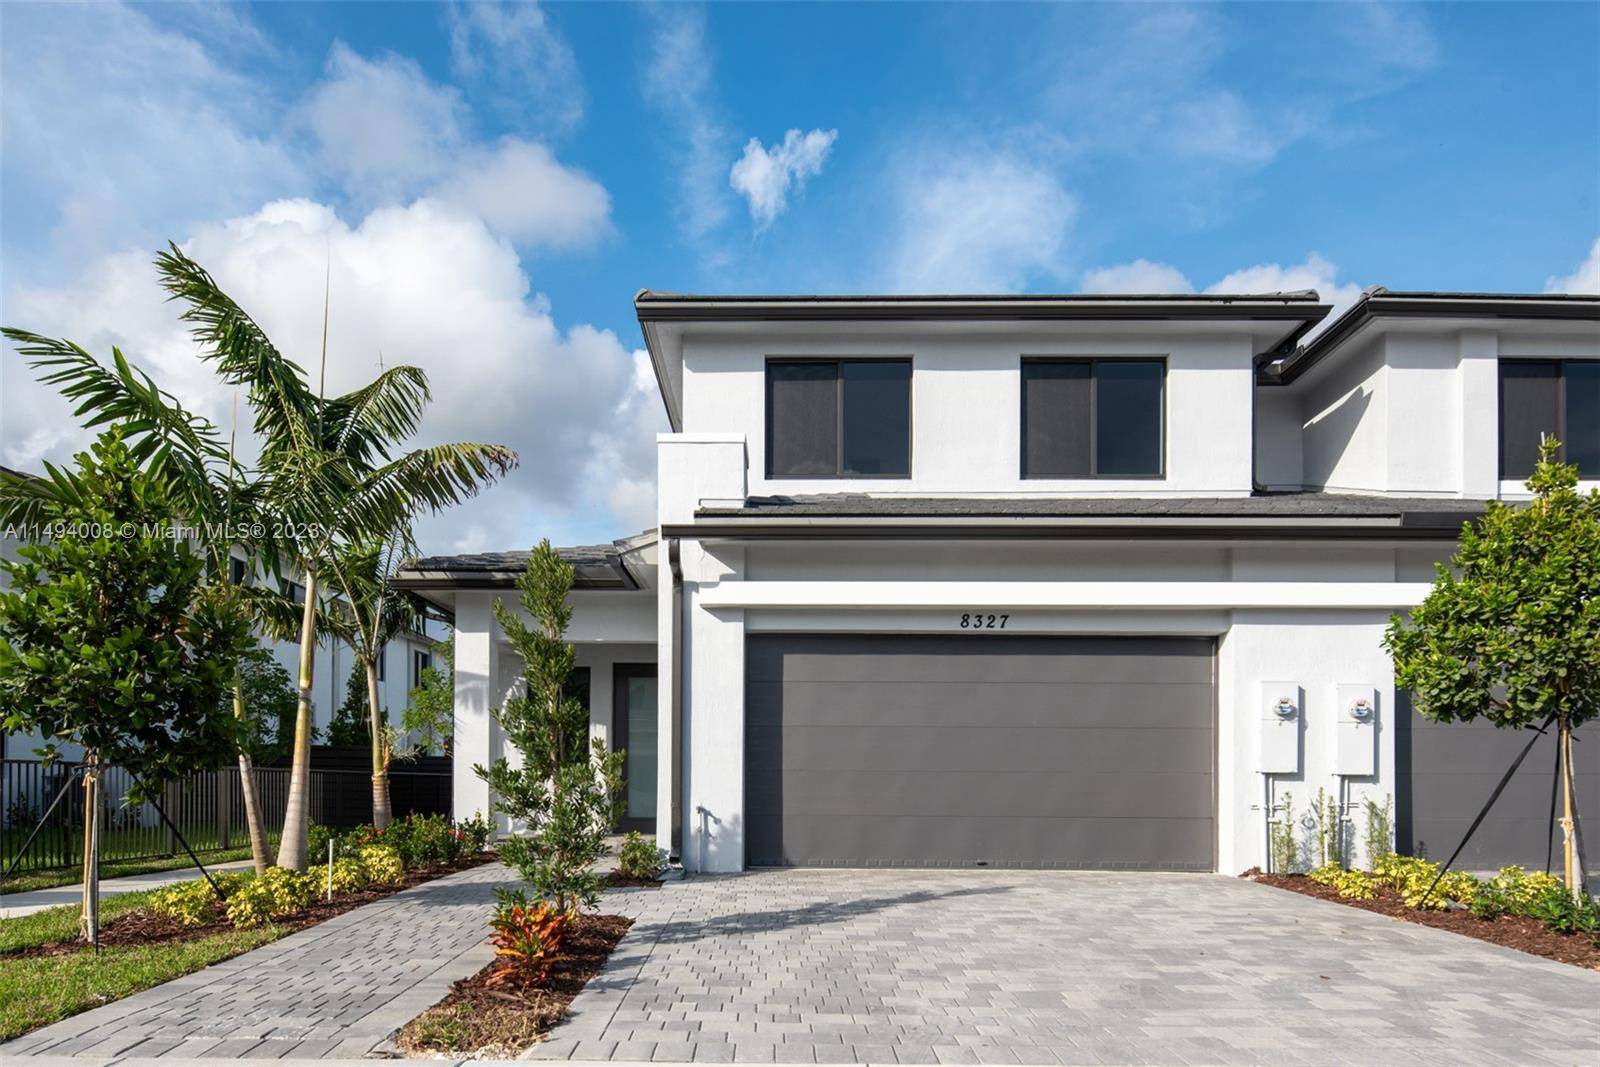 Located in Pinecrest's Zipcode in a Boutique Community West side of US1, this New TH is the largest model available.